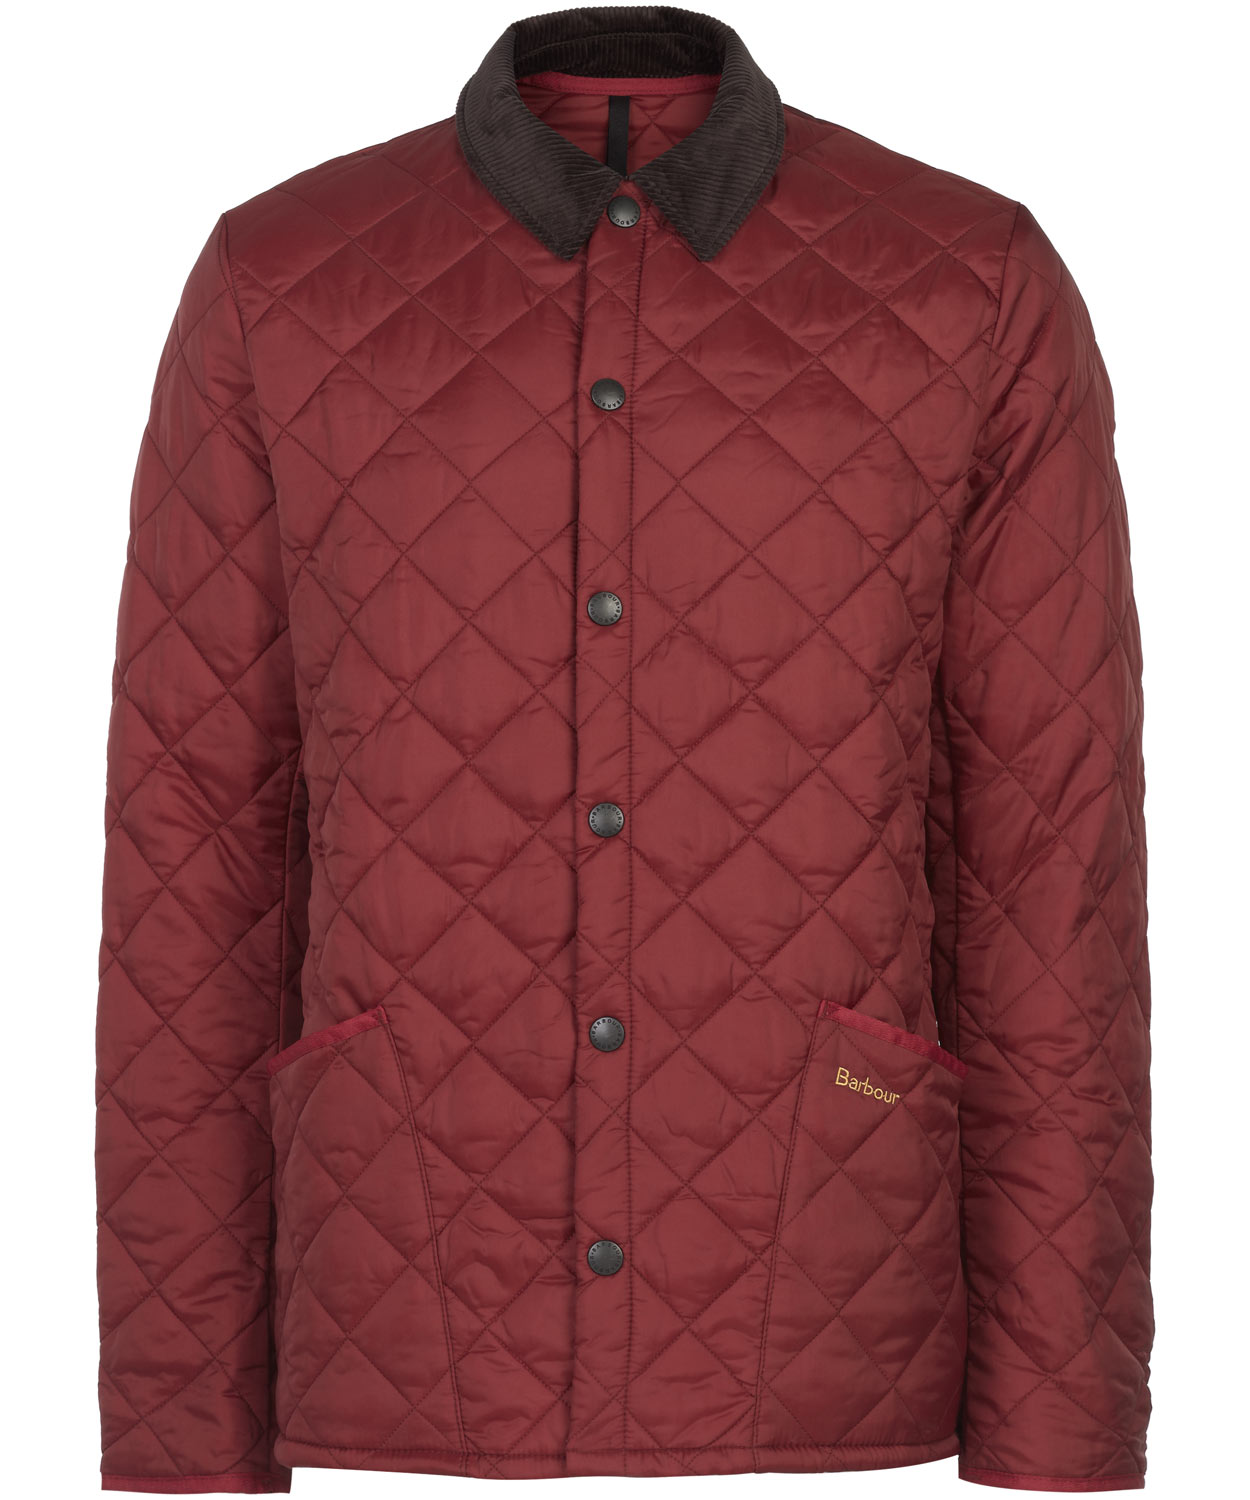 barbour quilted jacket red